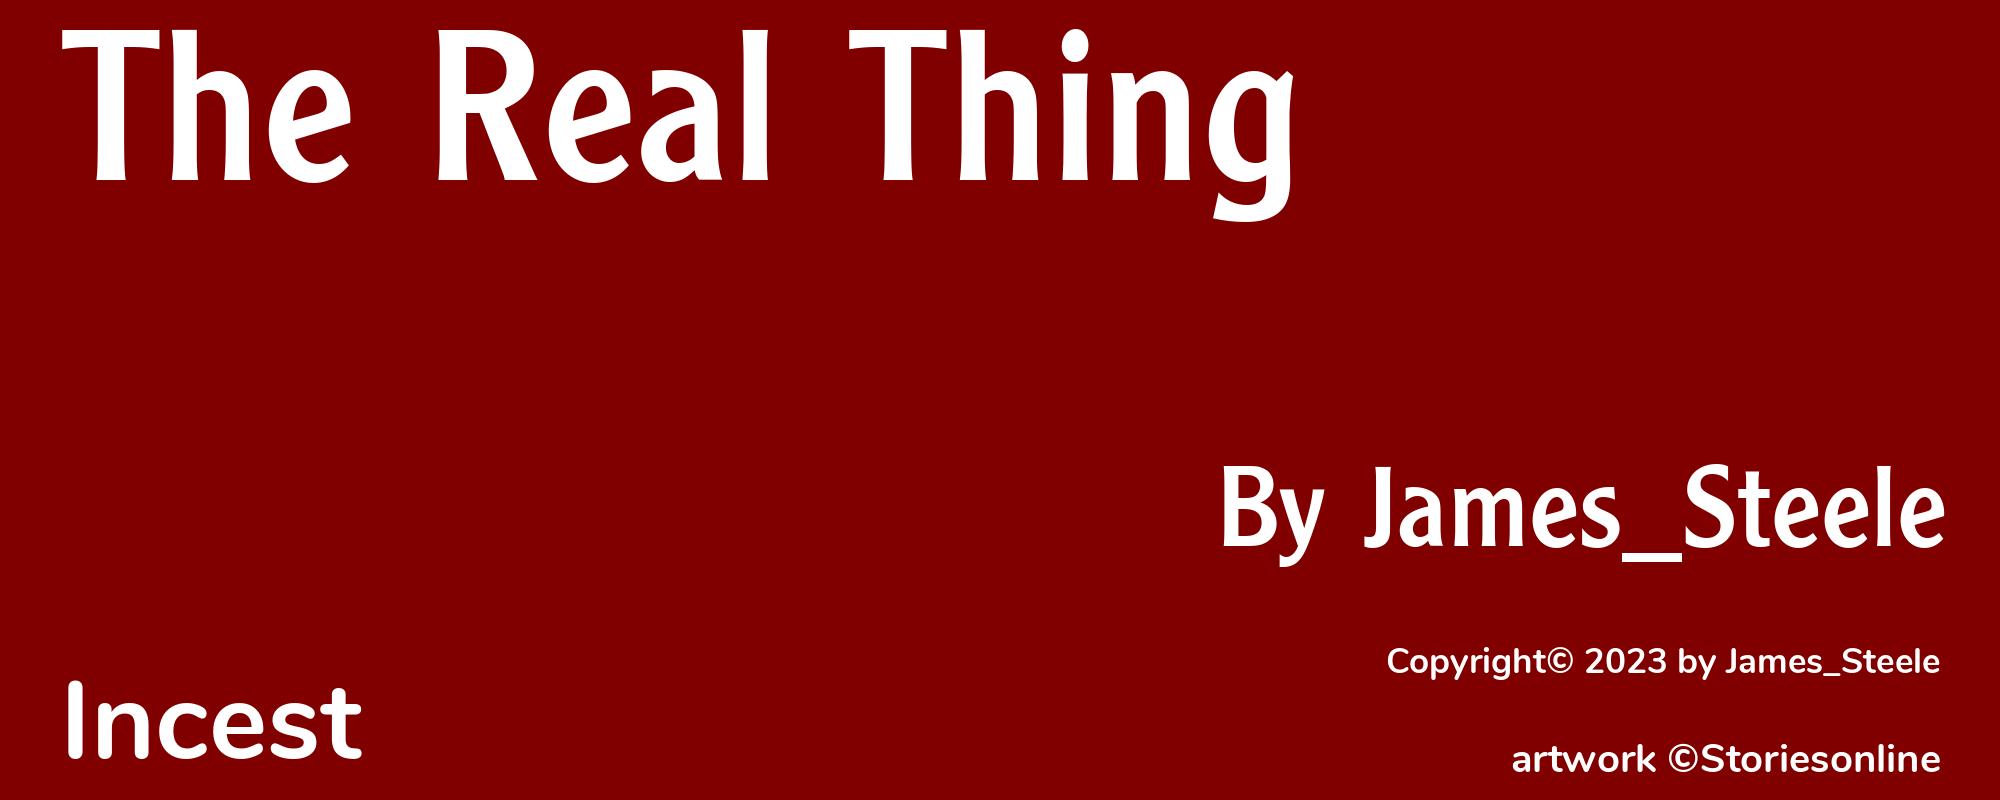 The Real Thing - Cover